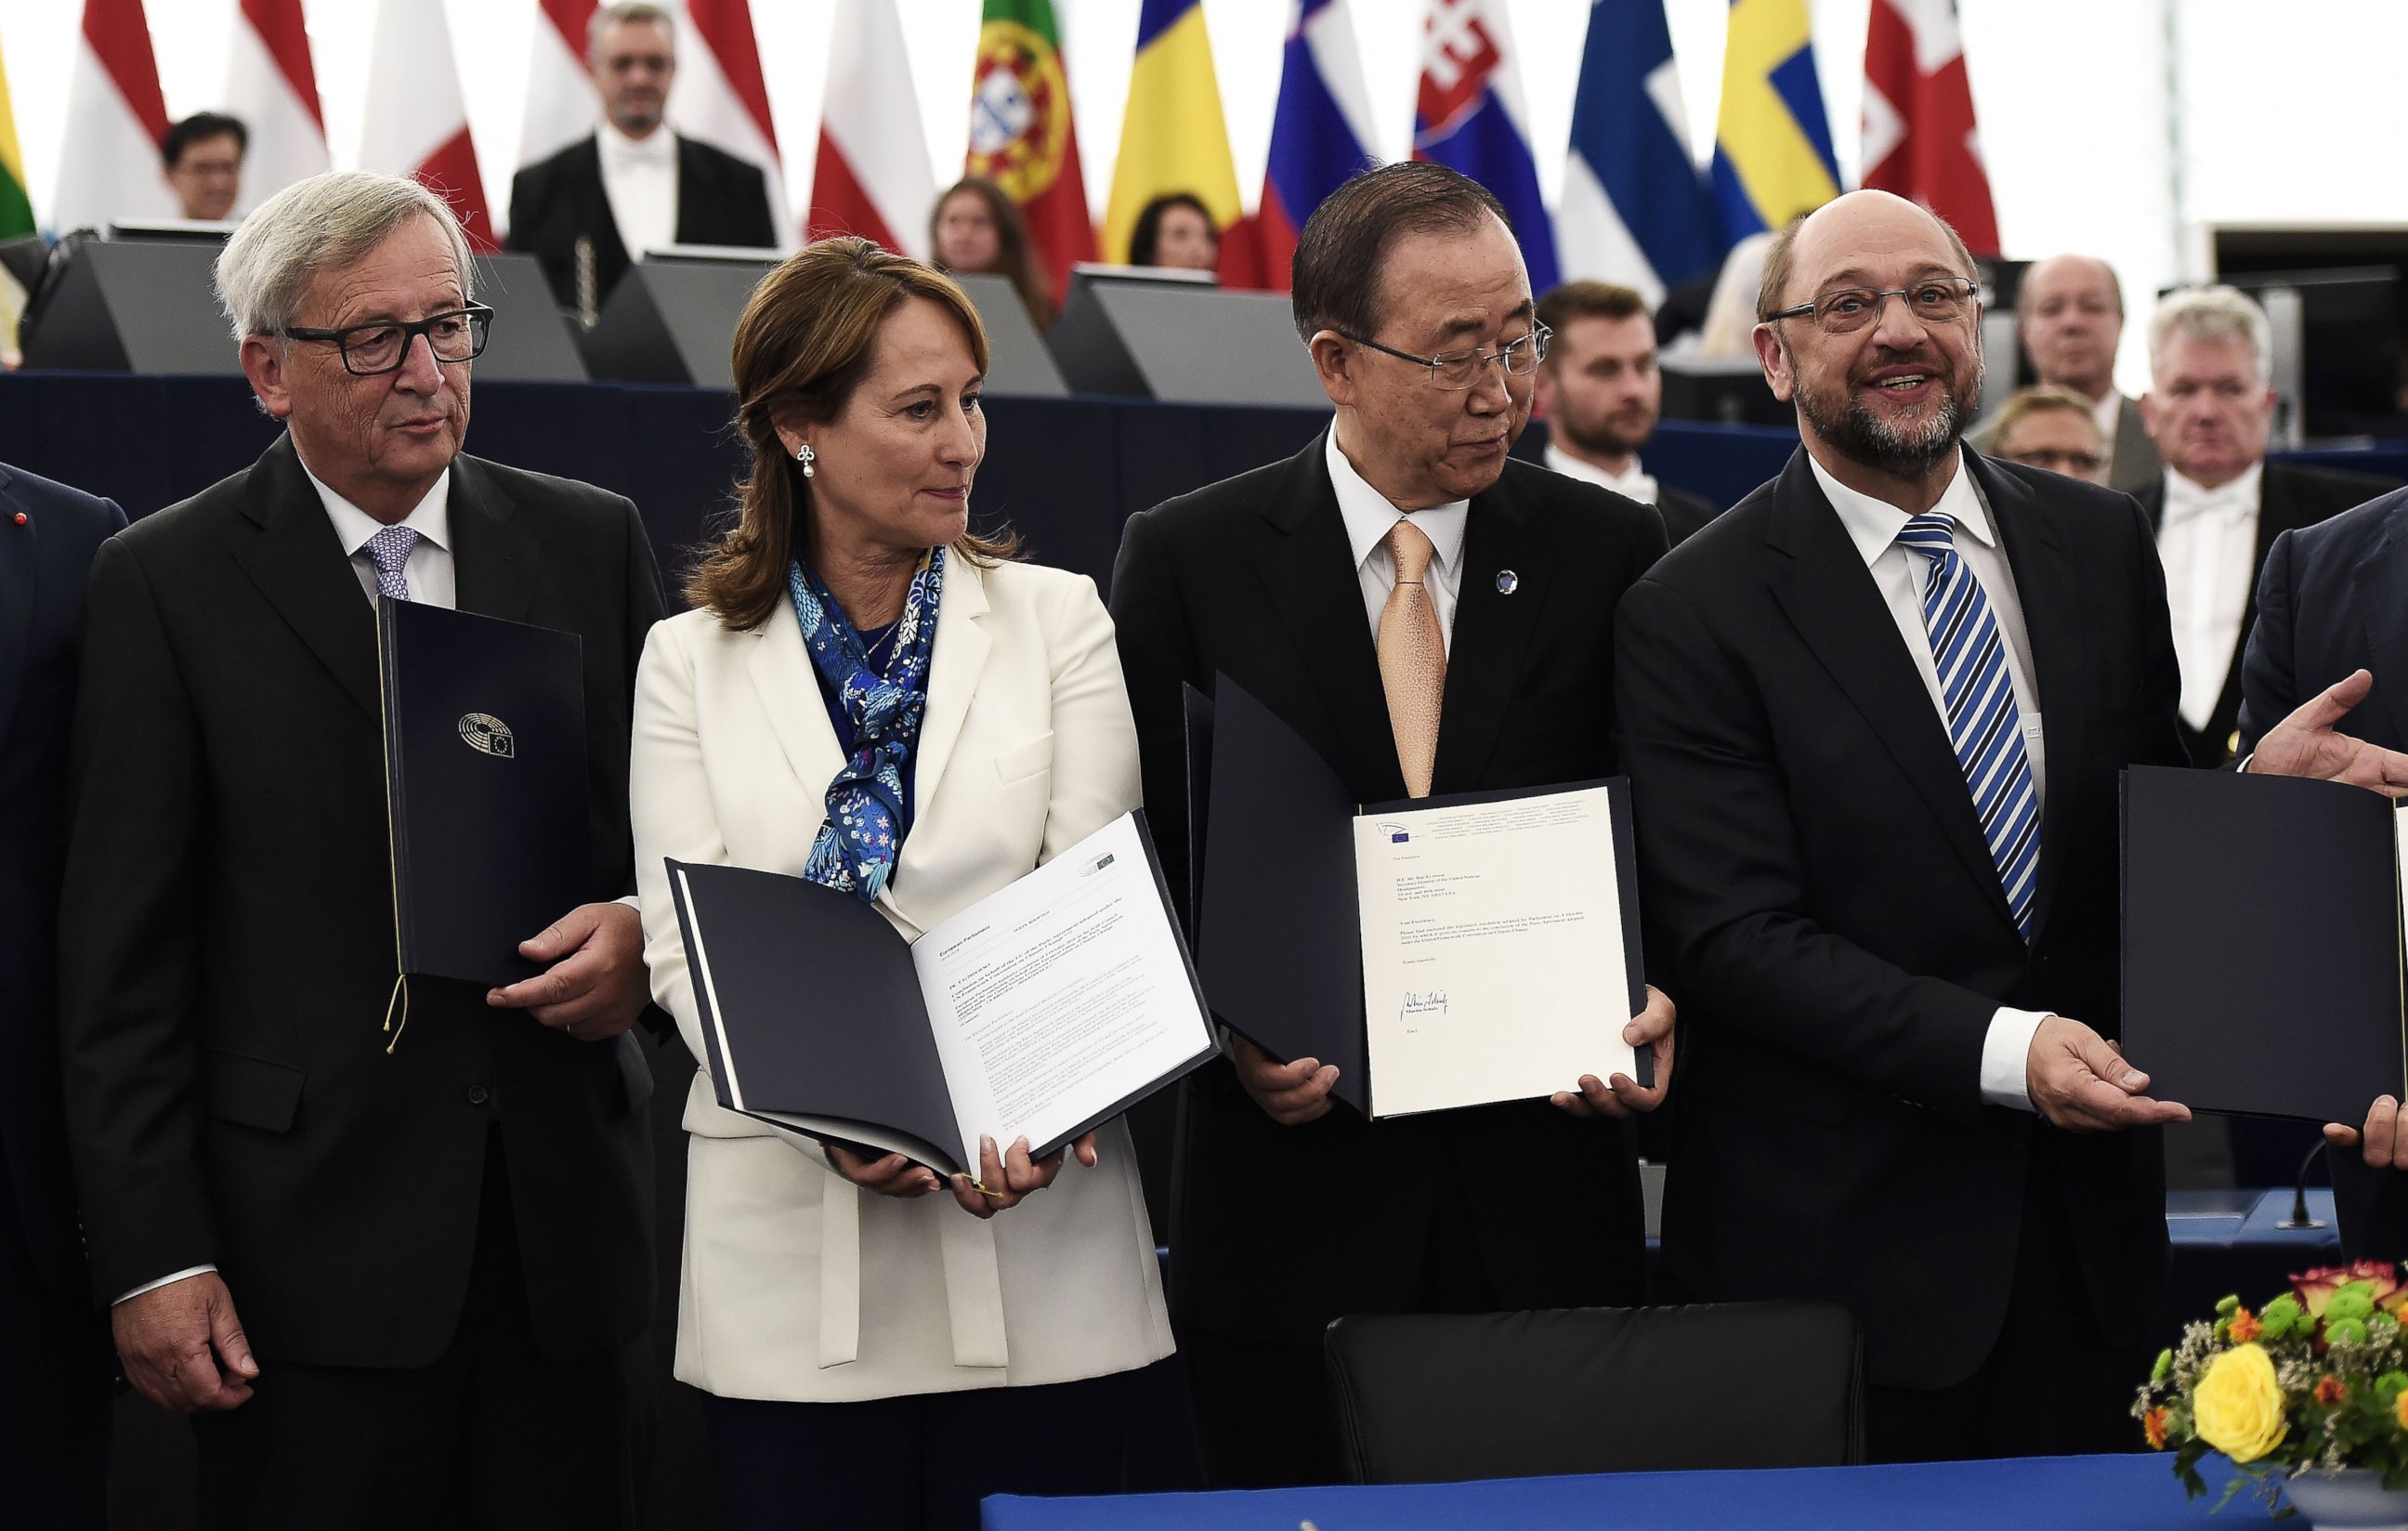 PHOTO: European Commission's President Jean-Claude Juncker, France's Minister for Ecology, Sustainable Development/Energy Segolene Royal, UN Secretary-General Ban Ki-moon and European Parliament President Martin Schulz in France, on Oct. 4, 2016.
